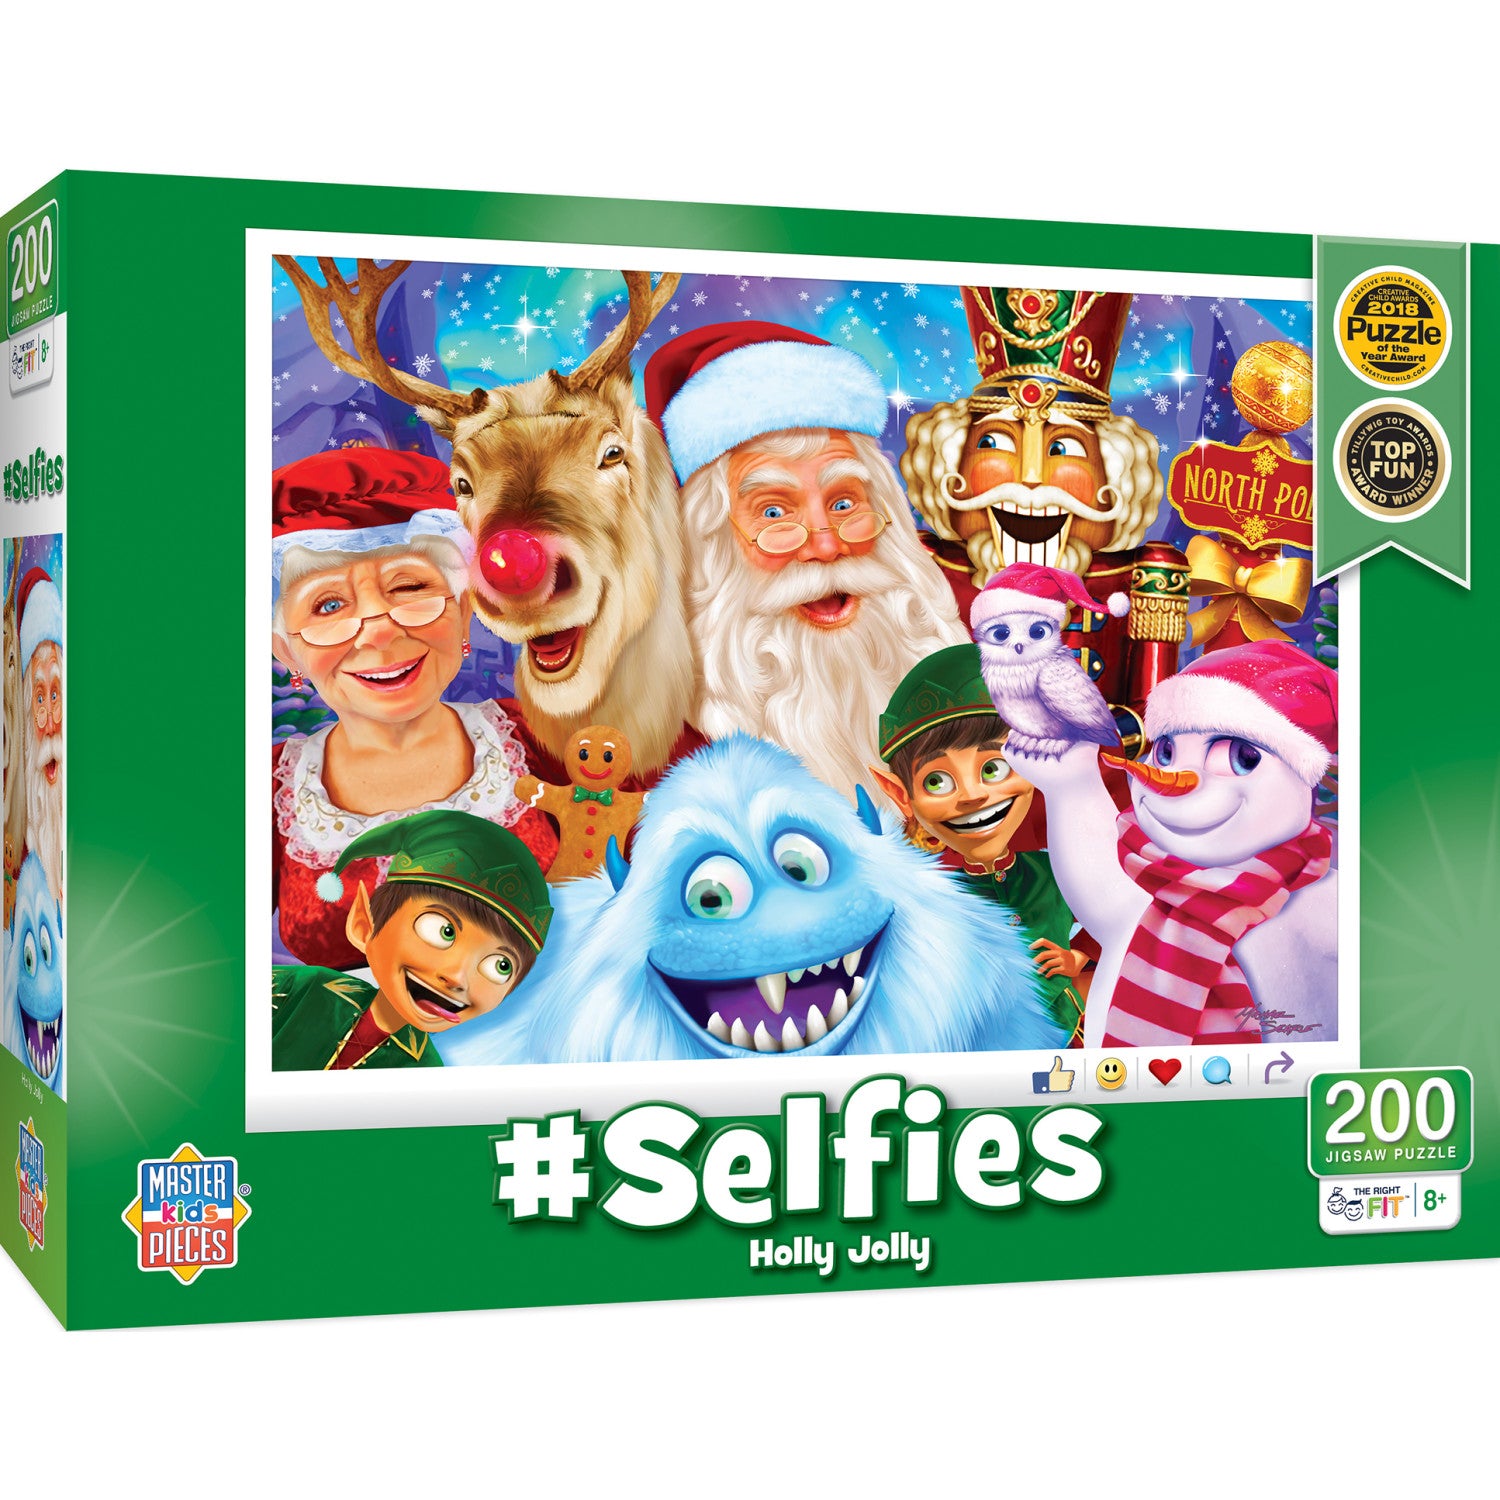 Selfies - Holly Jolly 200 Piece Jigsaw Puzzle